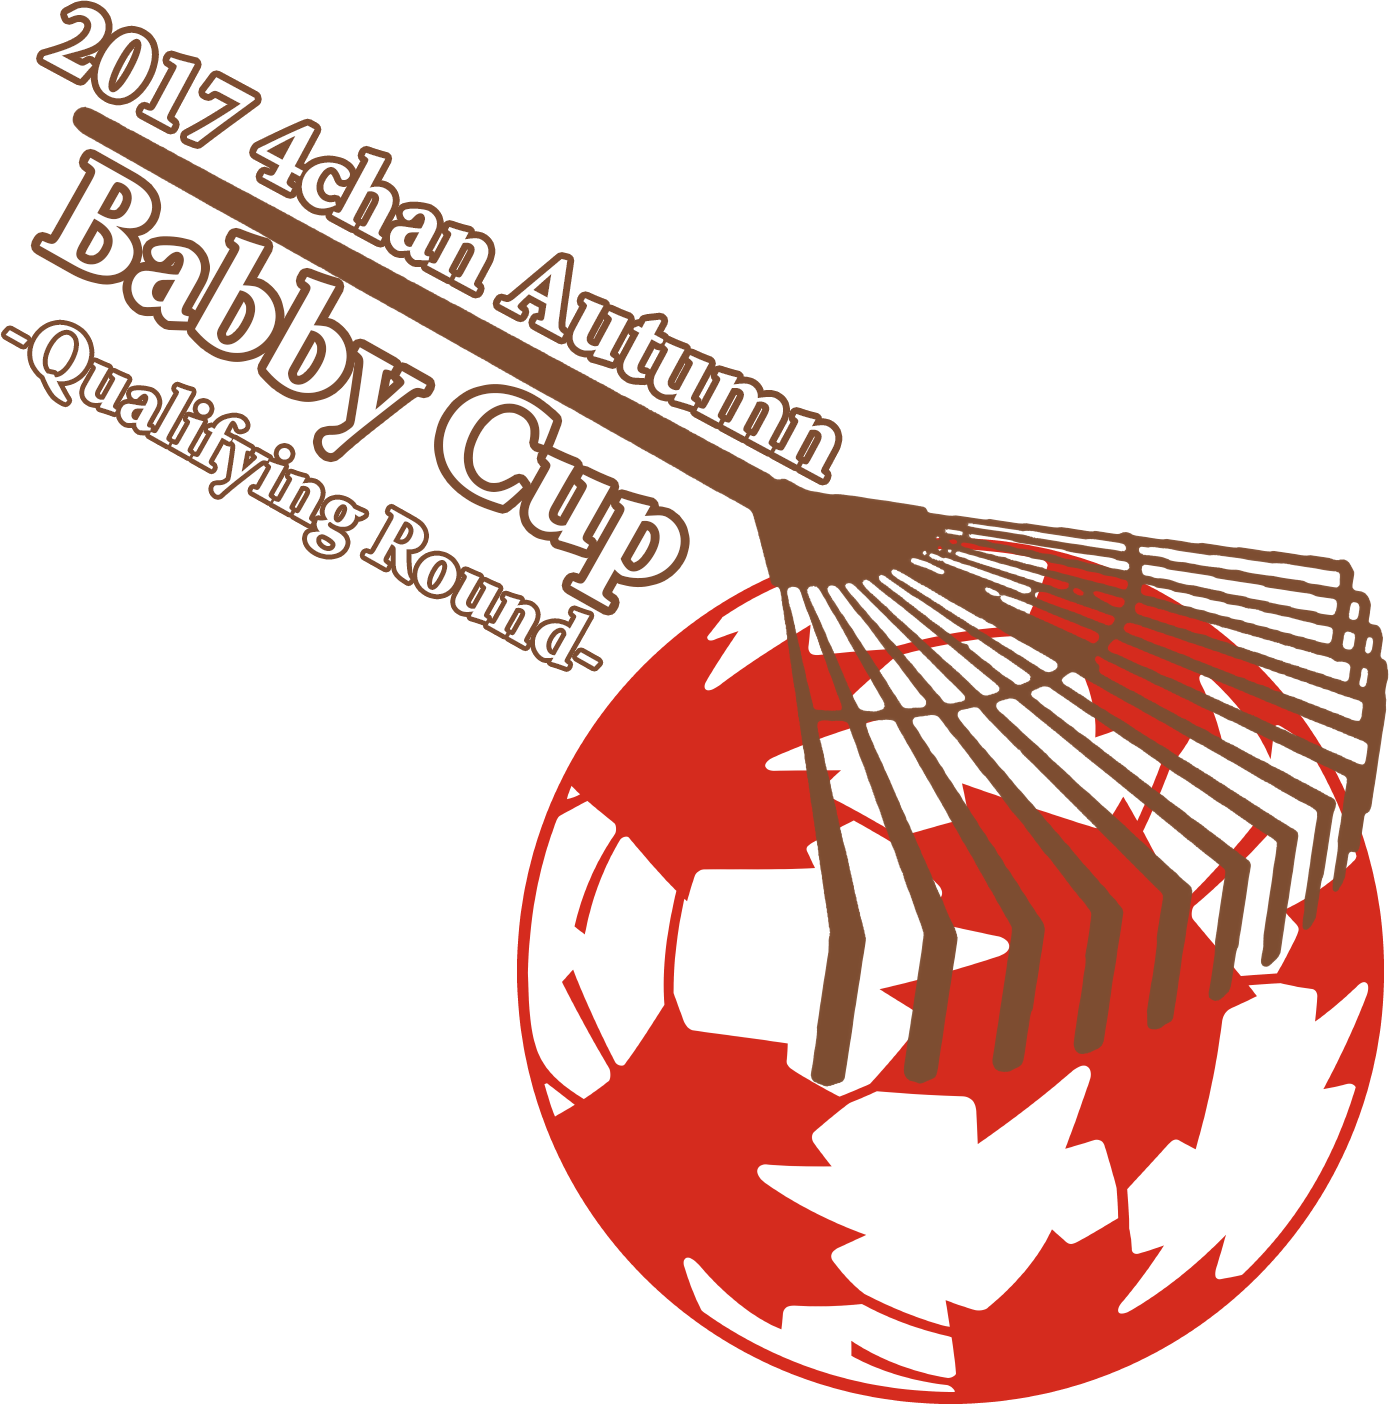 2017 4chan Autumn Babby Cup Qualifiers